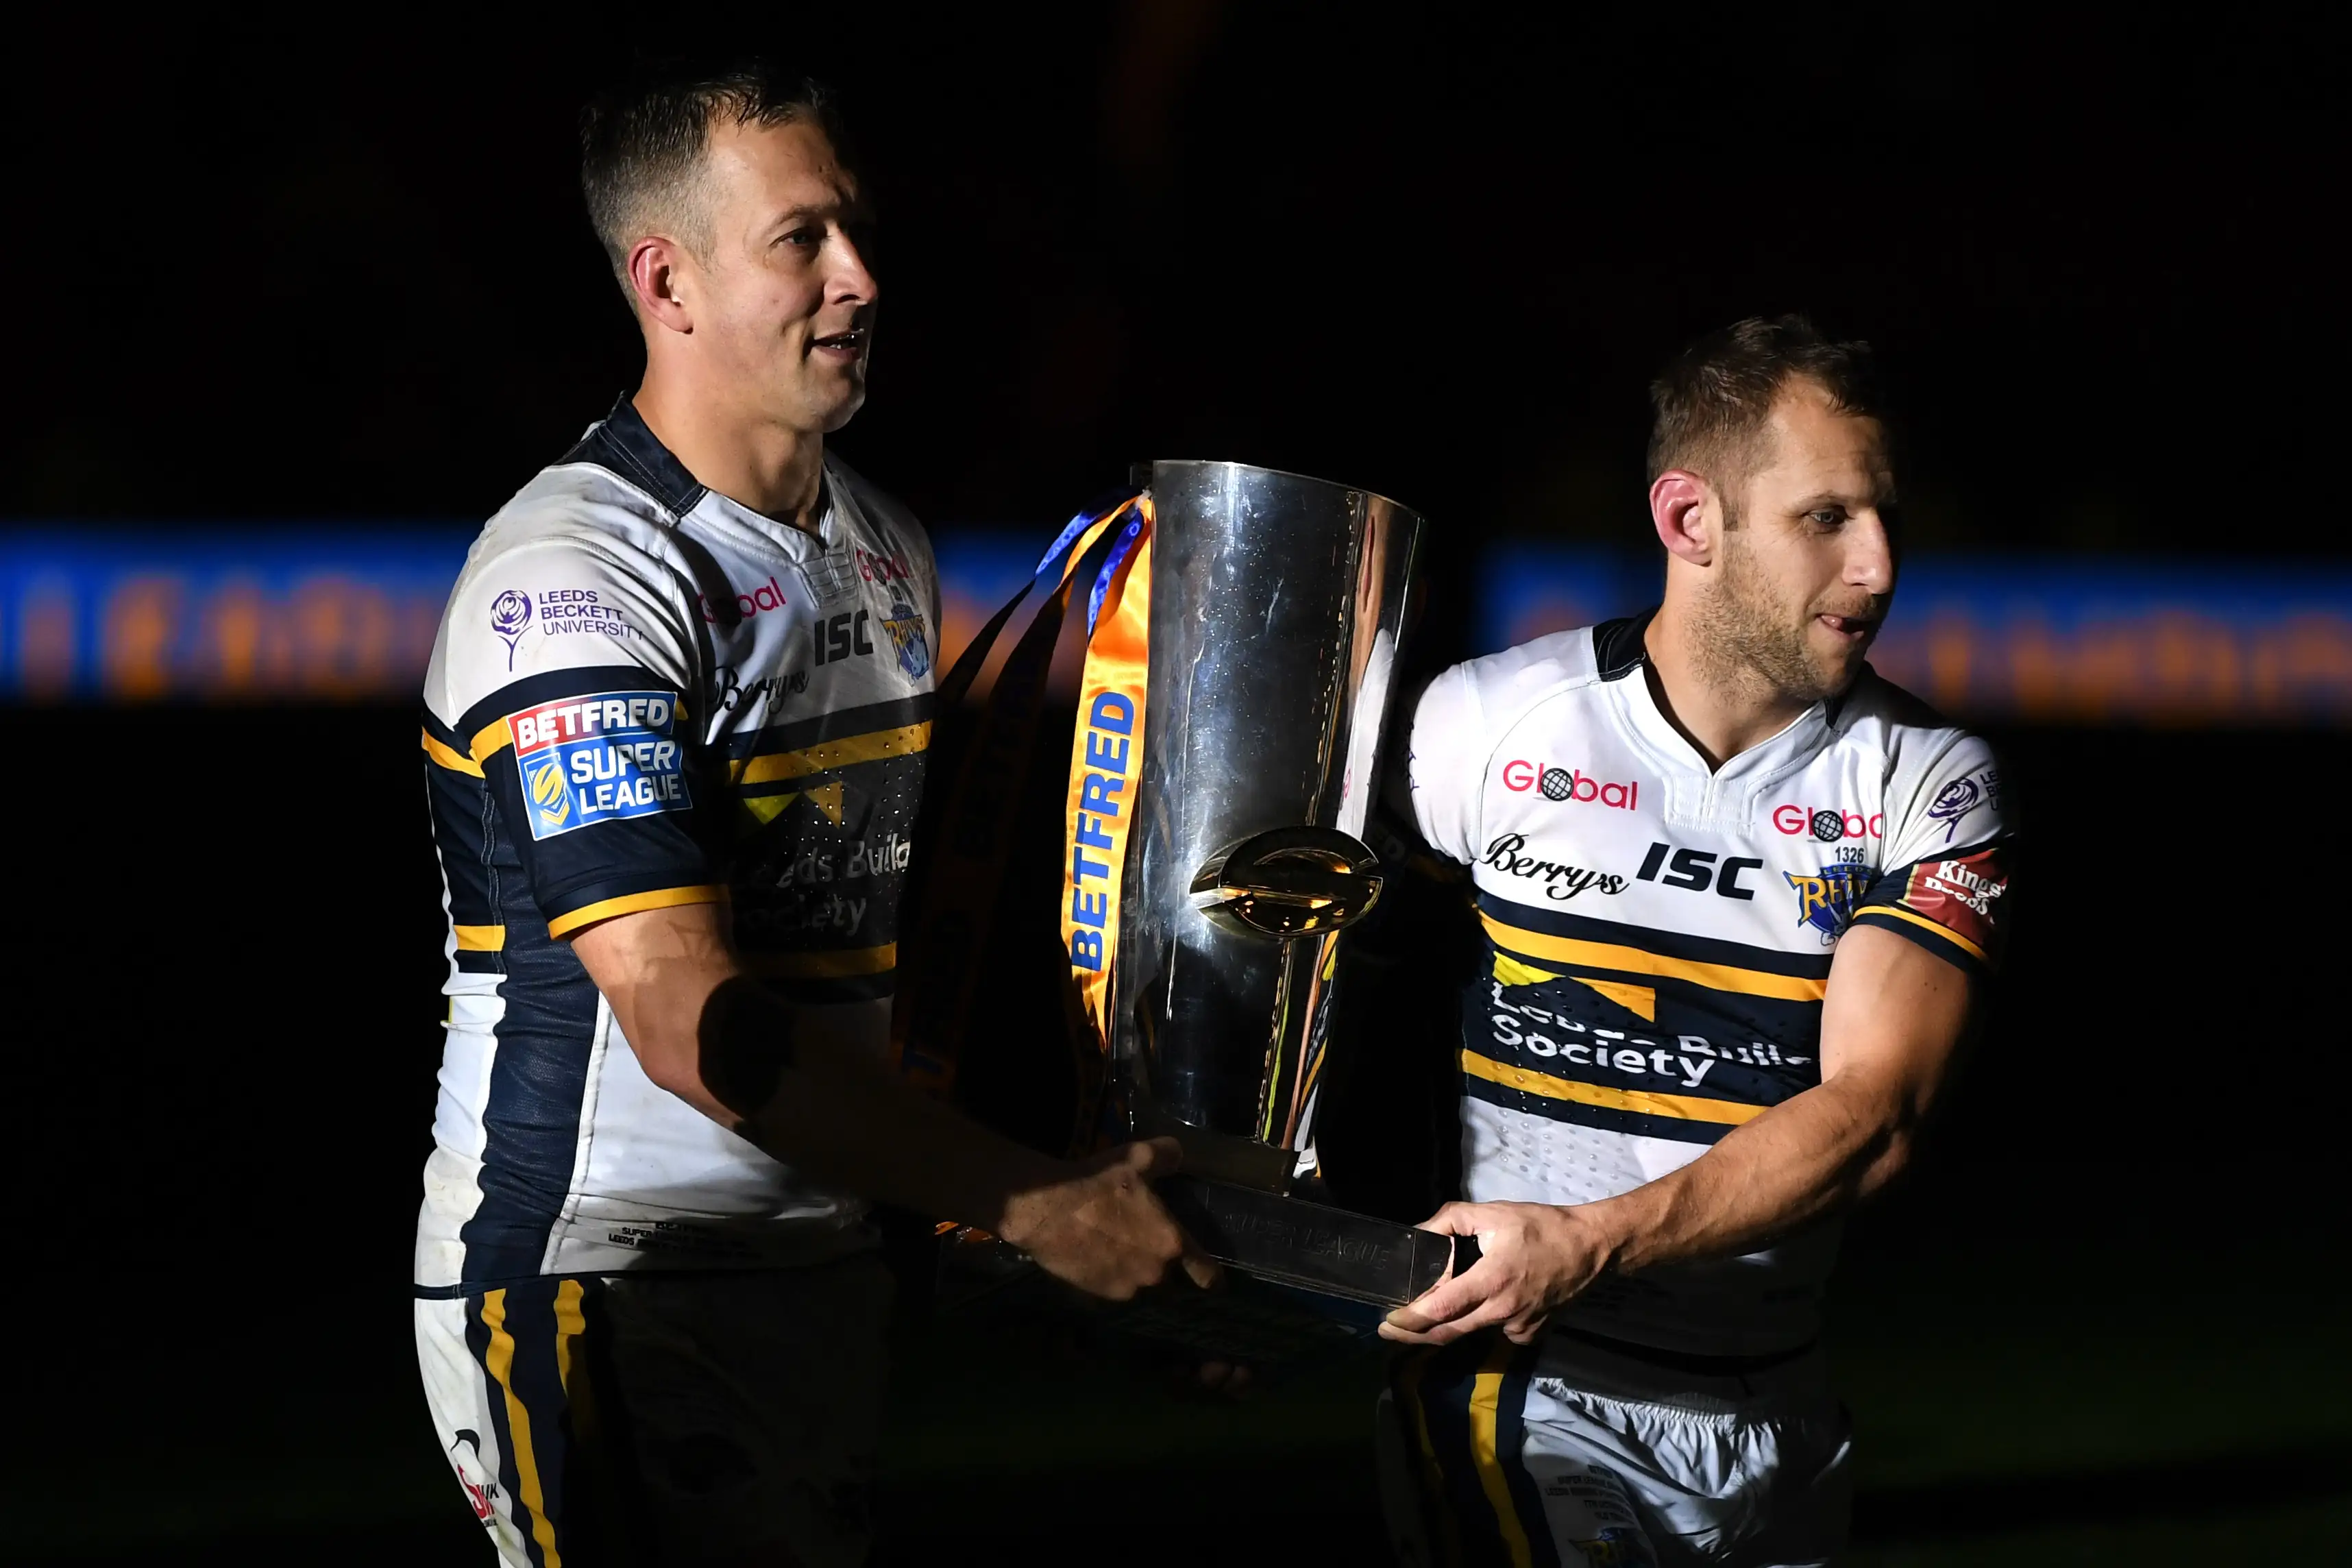 Six Super League legends retiring at the end of 2019